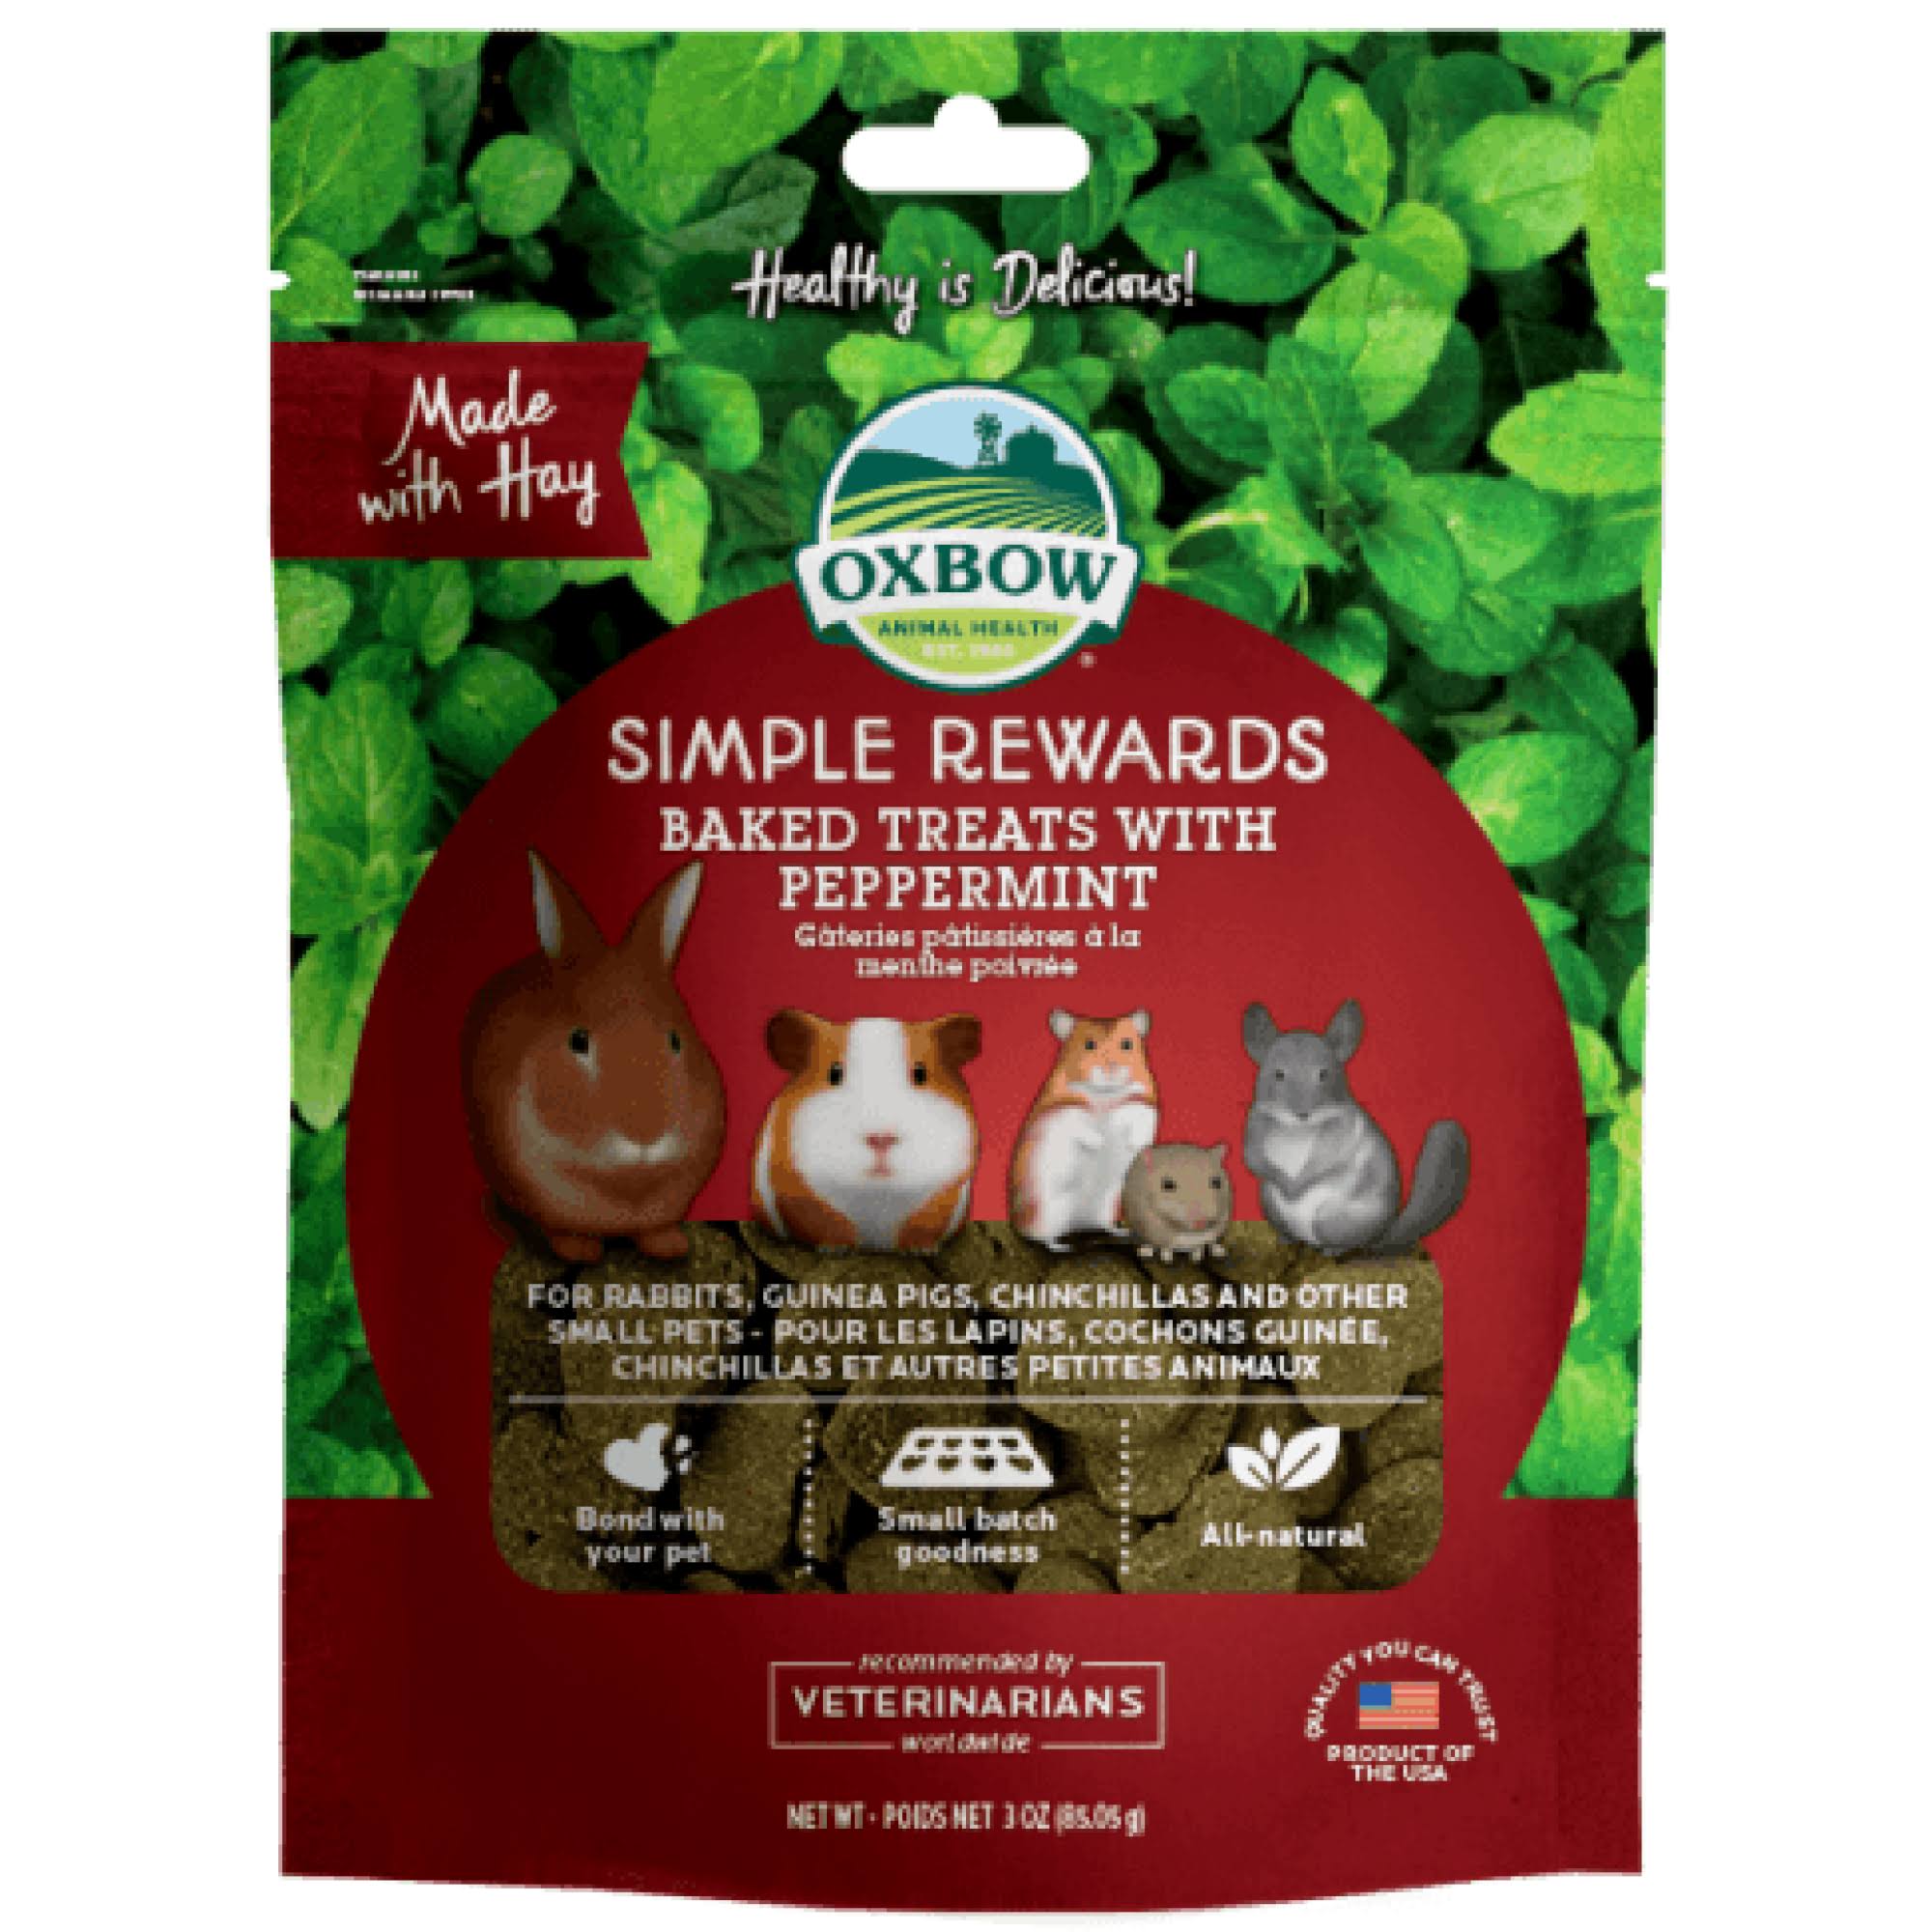 Oxbow Simple Rewards Oven Baked Treats - Peppermint, 57g